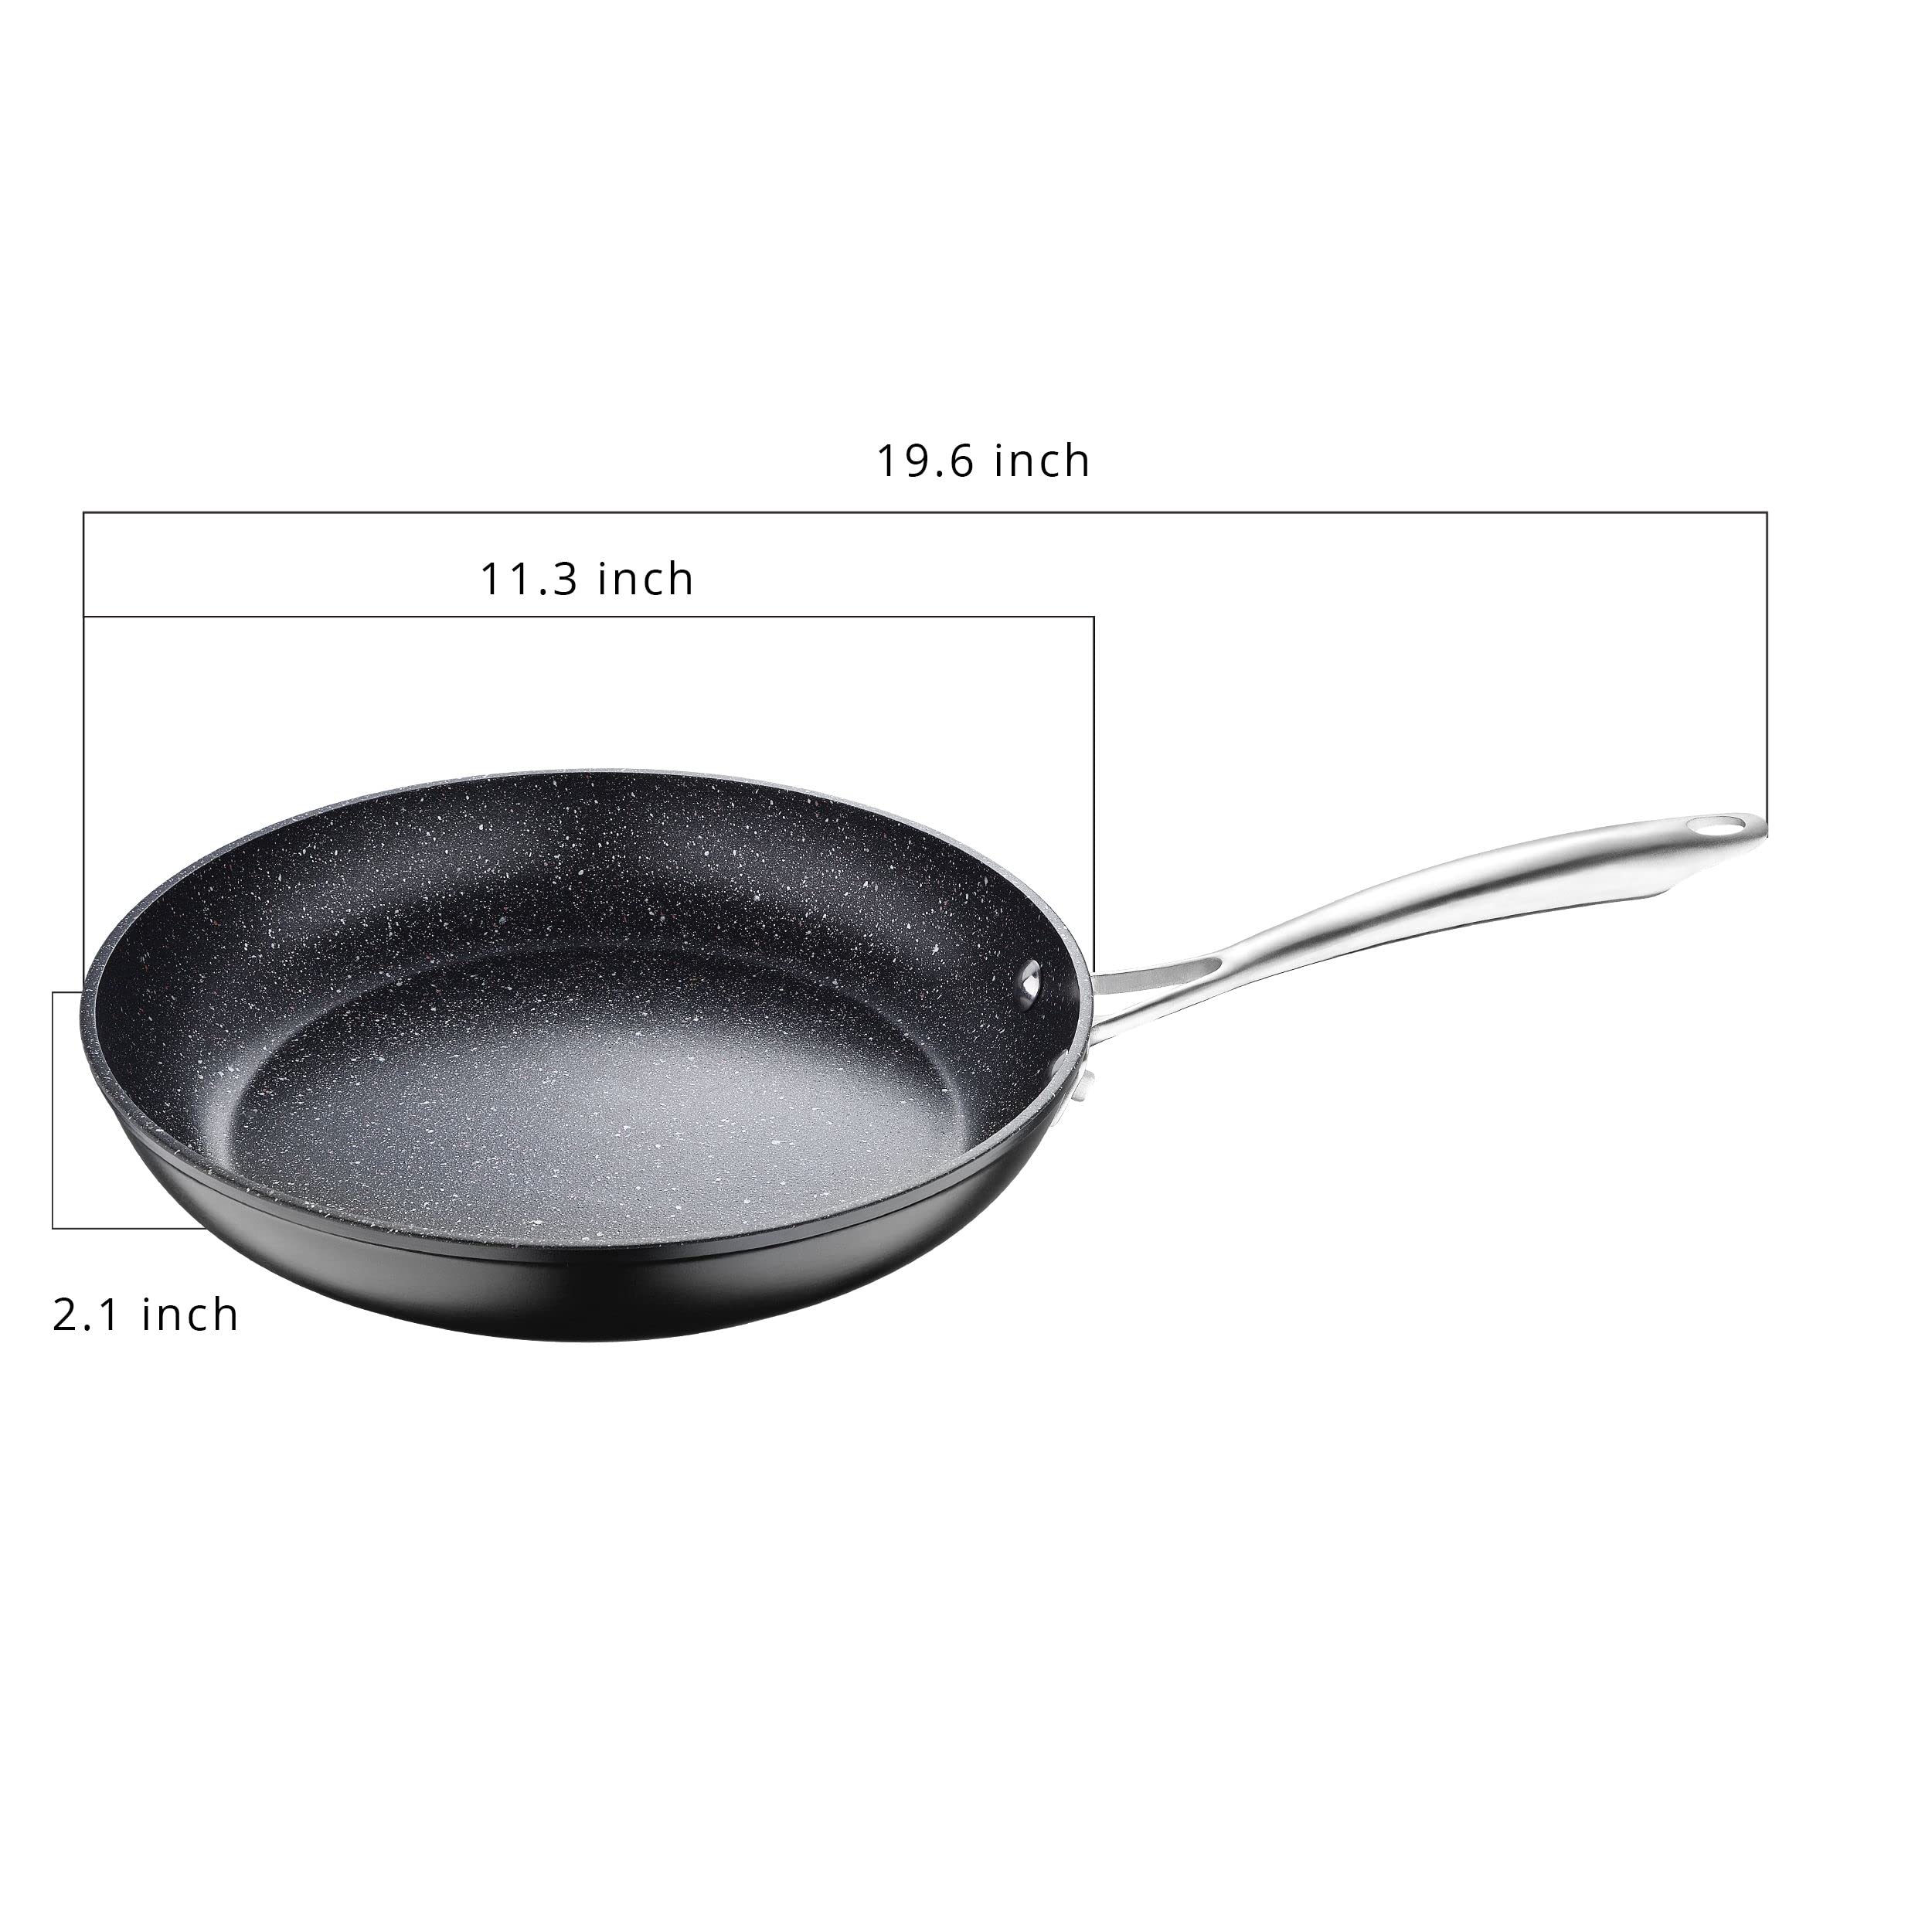 MasterPRO - Vital Forged Aluminum 11” Fry pan - Durable Quick Heating Pan with Stainless Steel Handles - Durable Cookware for All Stove Types - Dishwasher Safe